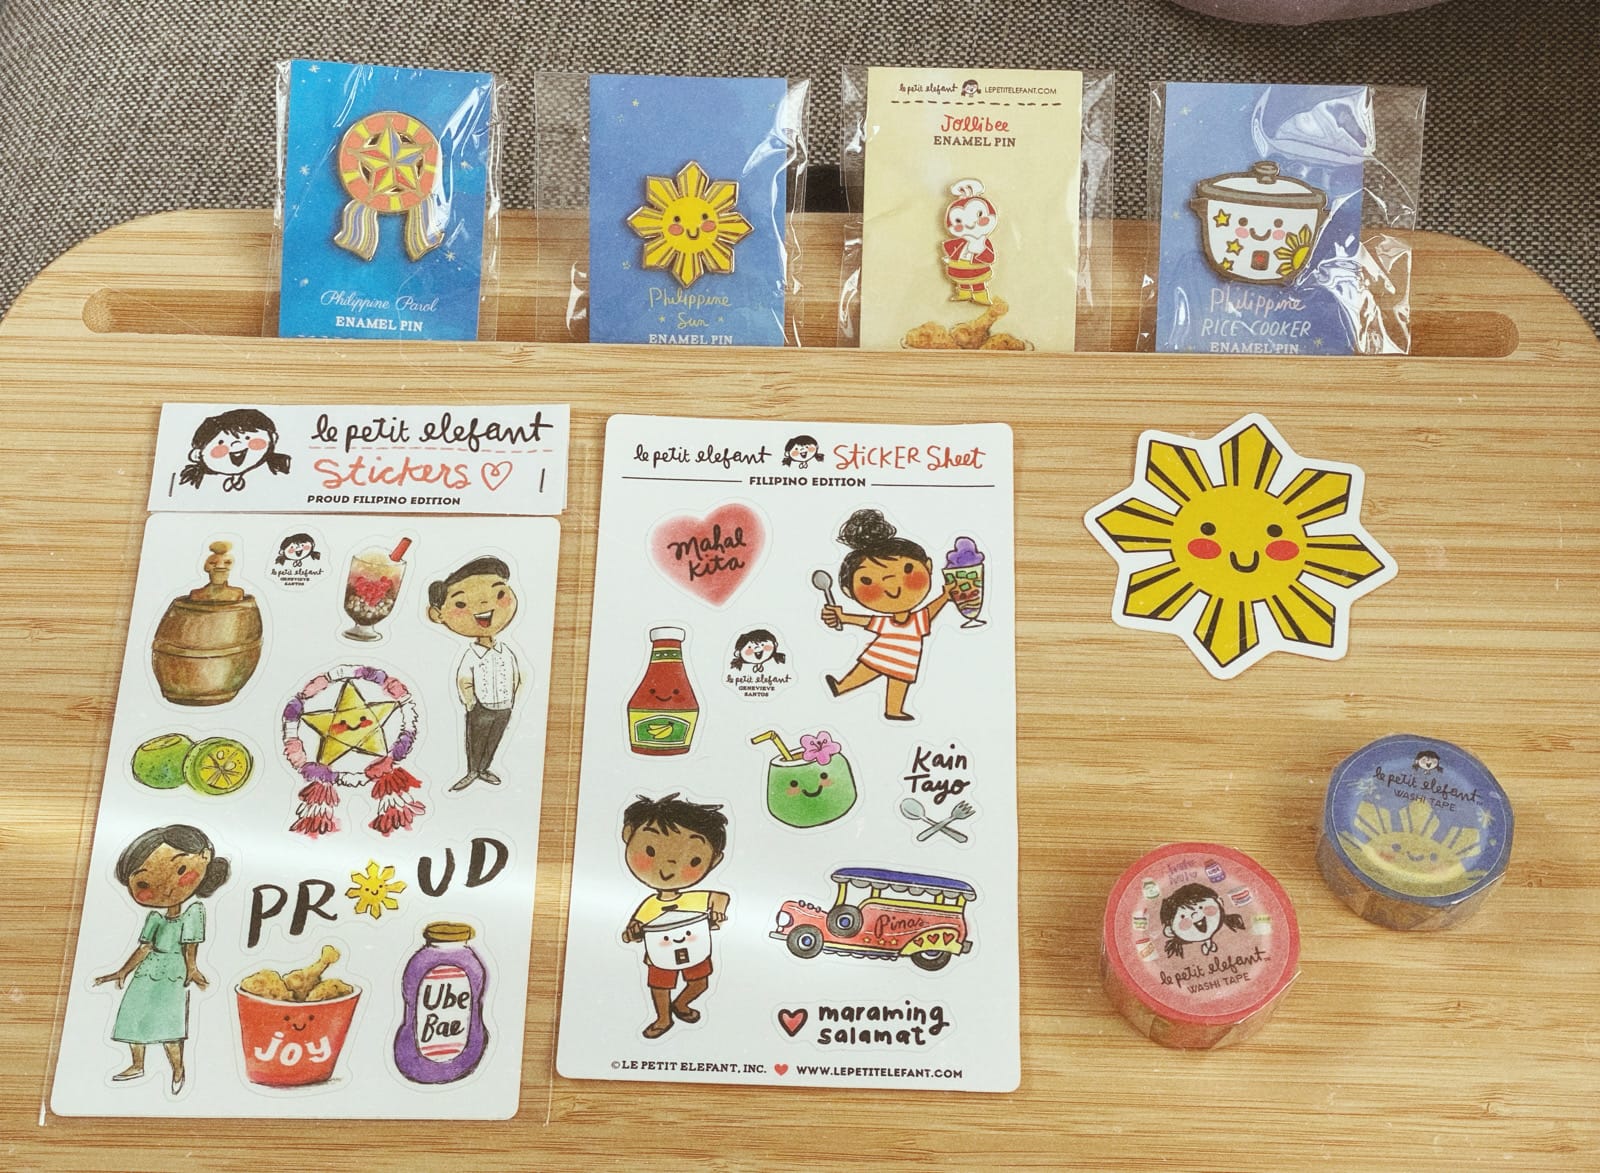 2 sticker sheets of Filipino-themed items, like the star found on the Philippine flag, a jeepney, a parol, coconut drinks. Also 2 washi tapes, 4 enamel pins, and another large Philippine sun sticker. 